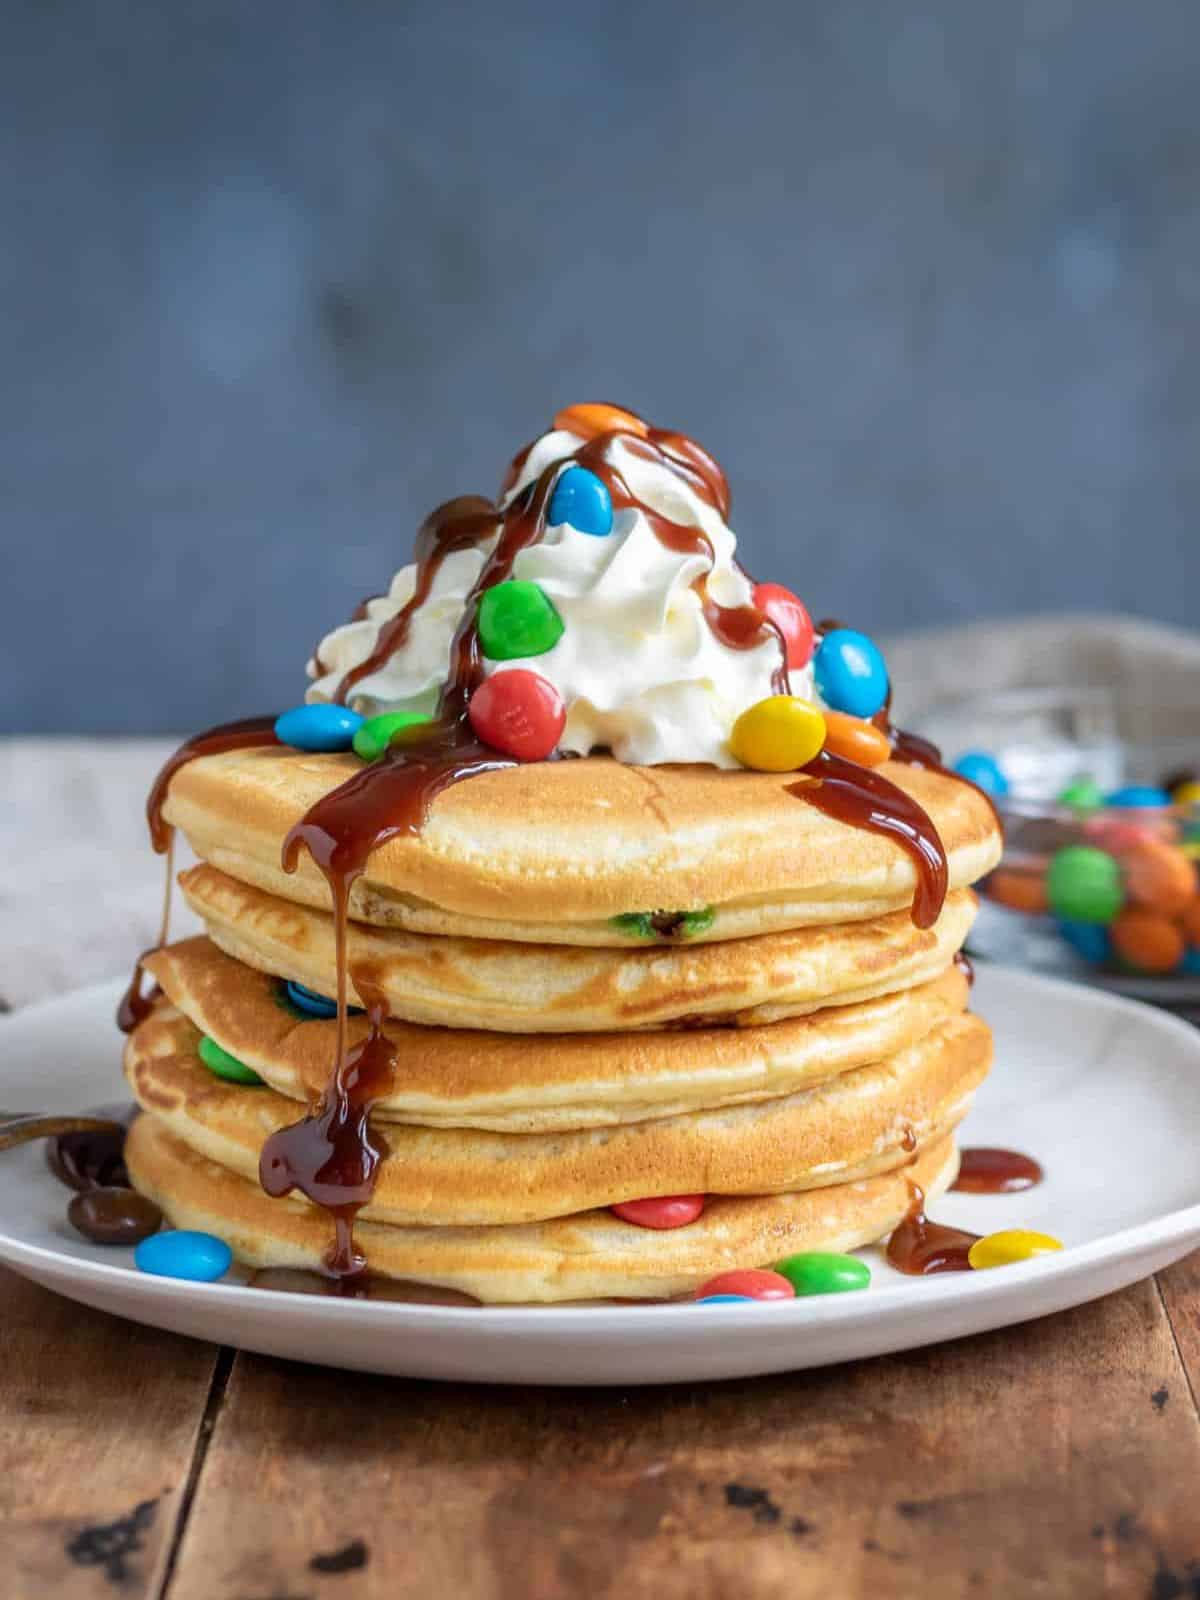 Stacked pancakes topped with maple syrup, M&Ms, and whipped cream.